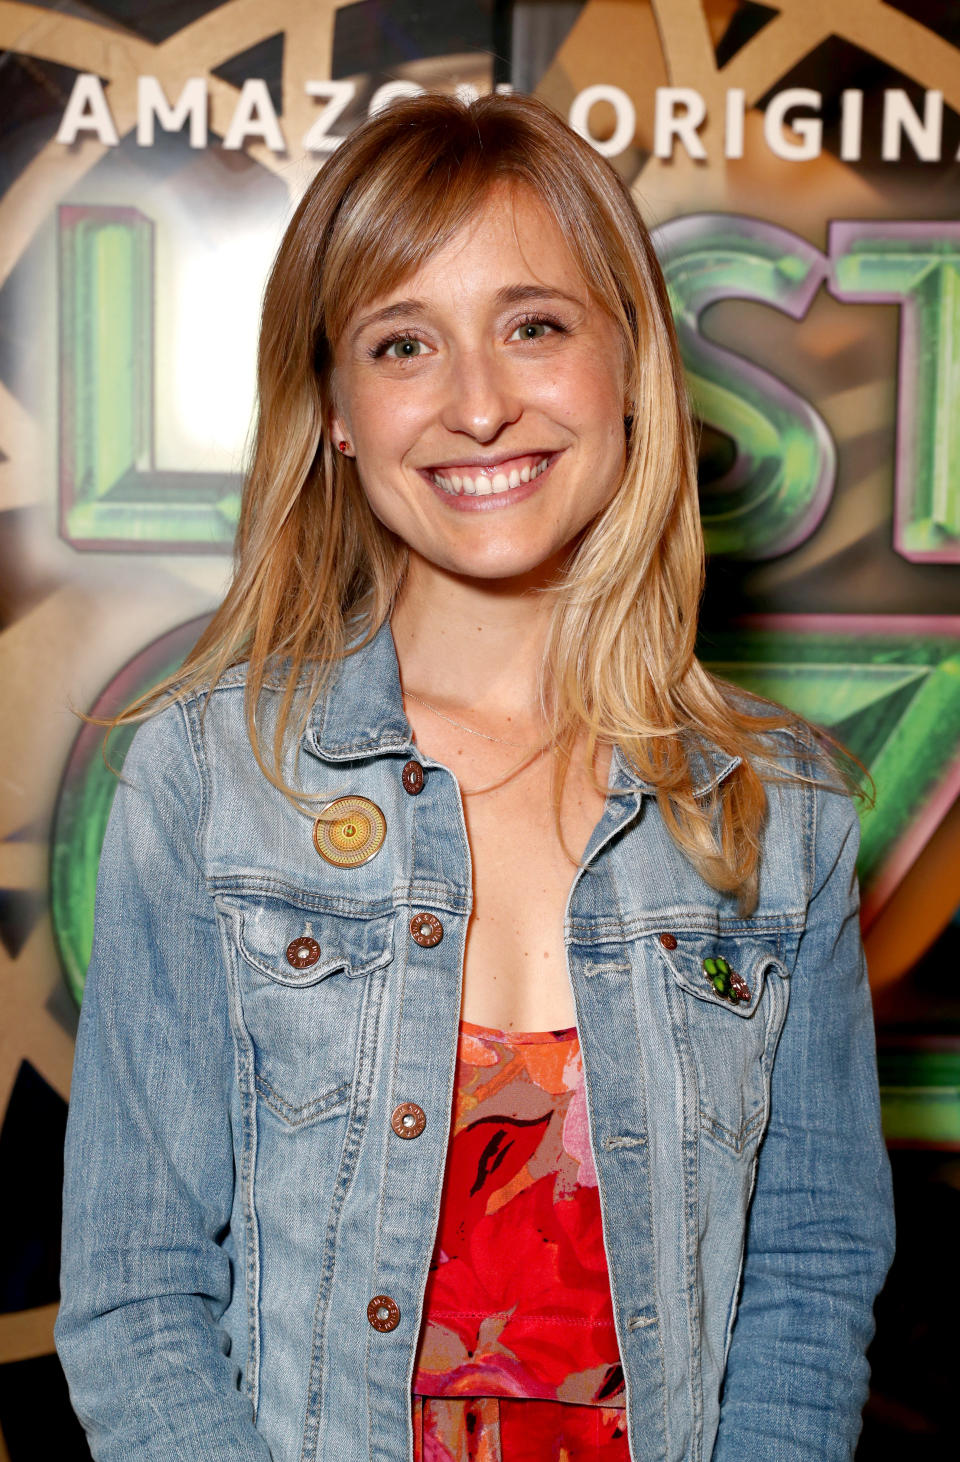 HOLLYWOOD, CA - AUGUST 01:  Allison Mack attends Amazon Studios' premiere for 'Lost In Oz' at NeueHouse Los Angeles on August 1, 2017 in Hollywood, California.  (Photo by Todd Williamson/Getty Images for Amazon Studios)